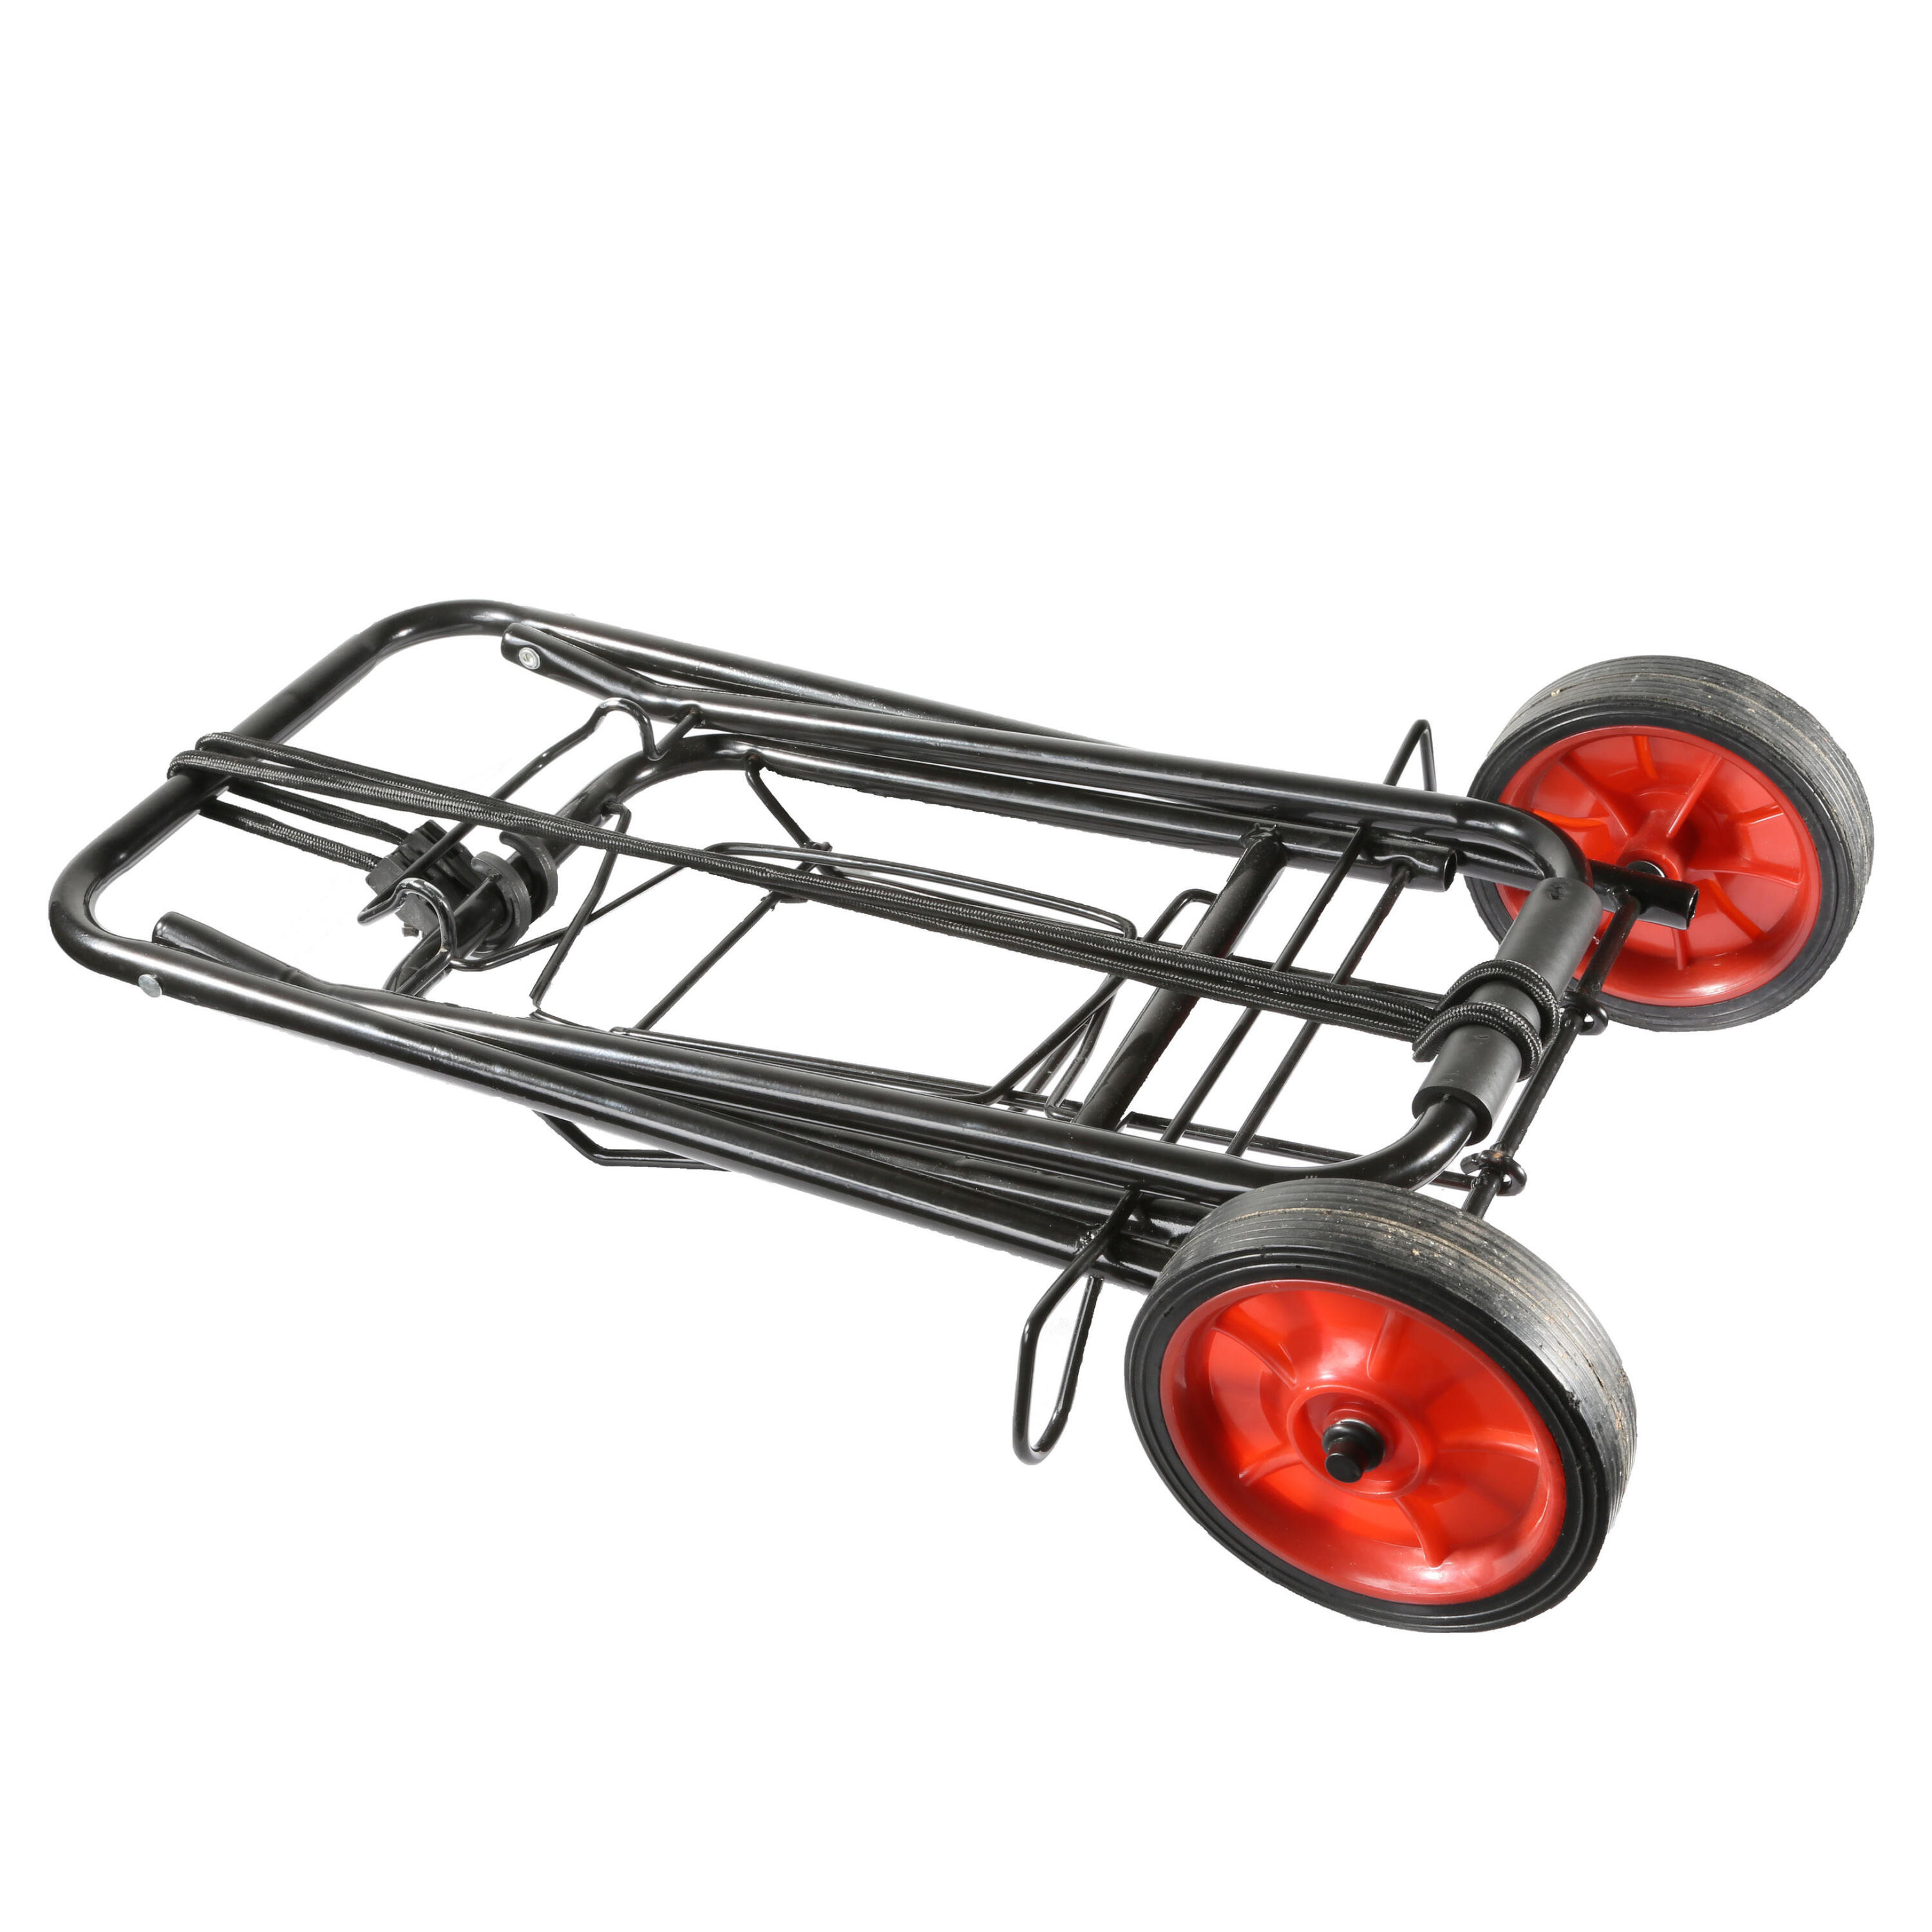 Foldable Trolley for Camping Equipment 2/3